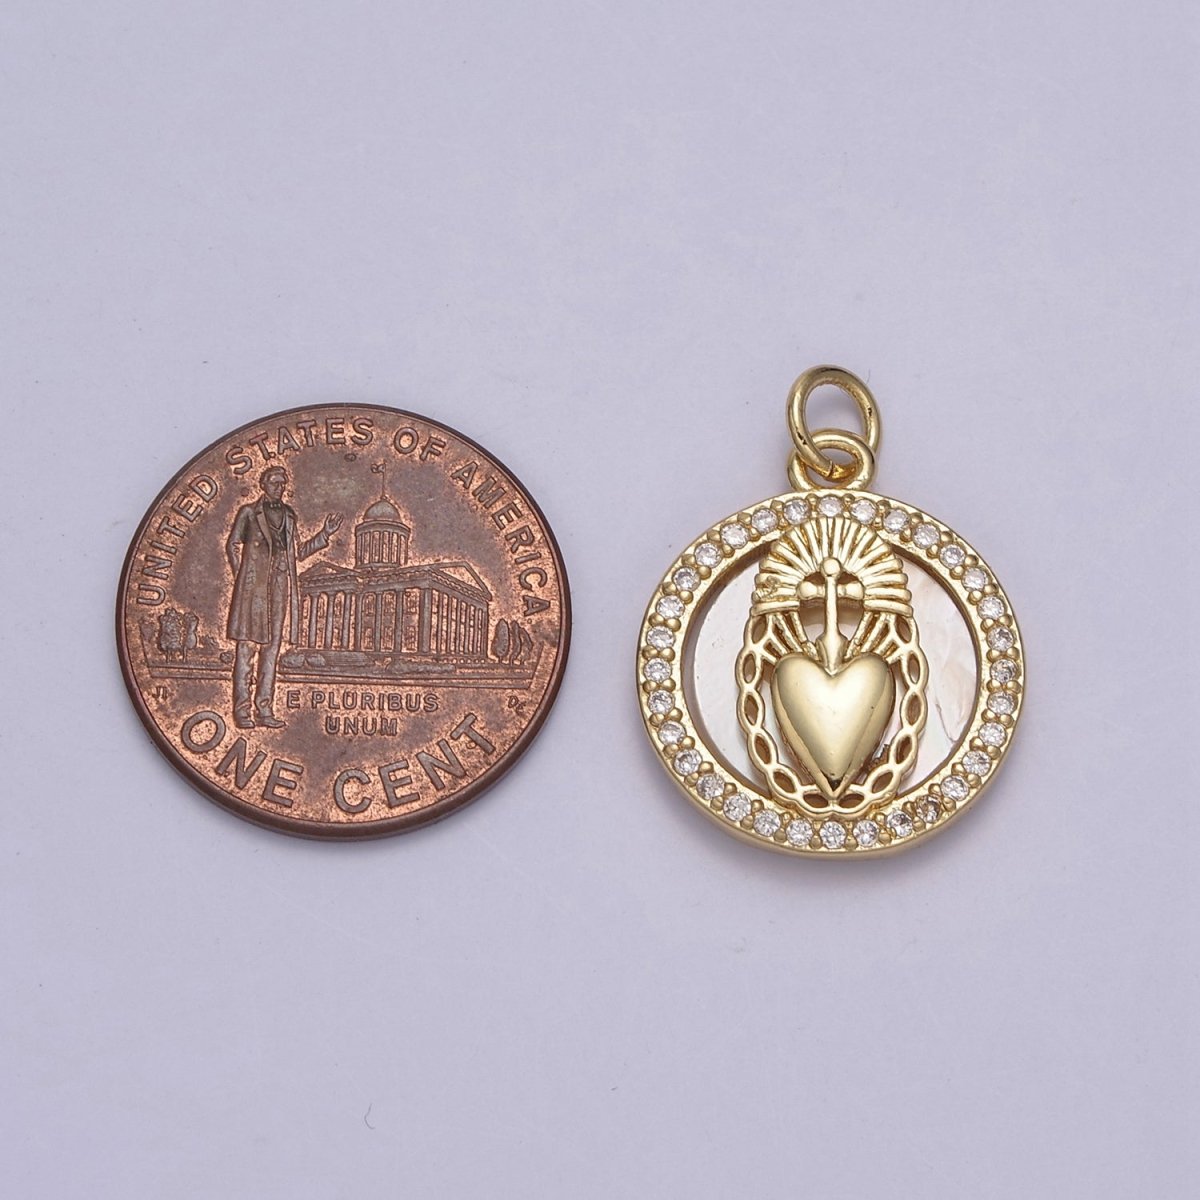 Sacred Heart Charm 24k Gold Filled Religious Charm Cross Pendant Catholic Jewelry Coin Ancient Medallion N-713 N-714 - DLUXCA